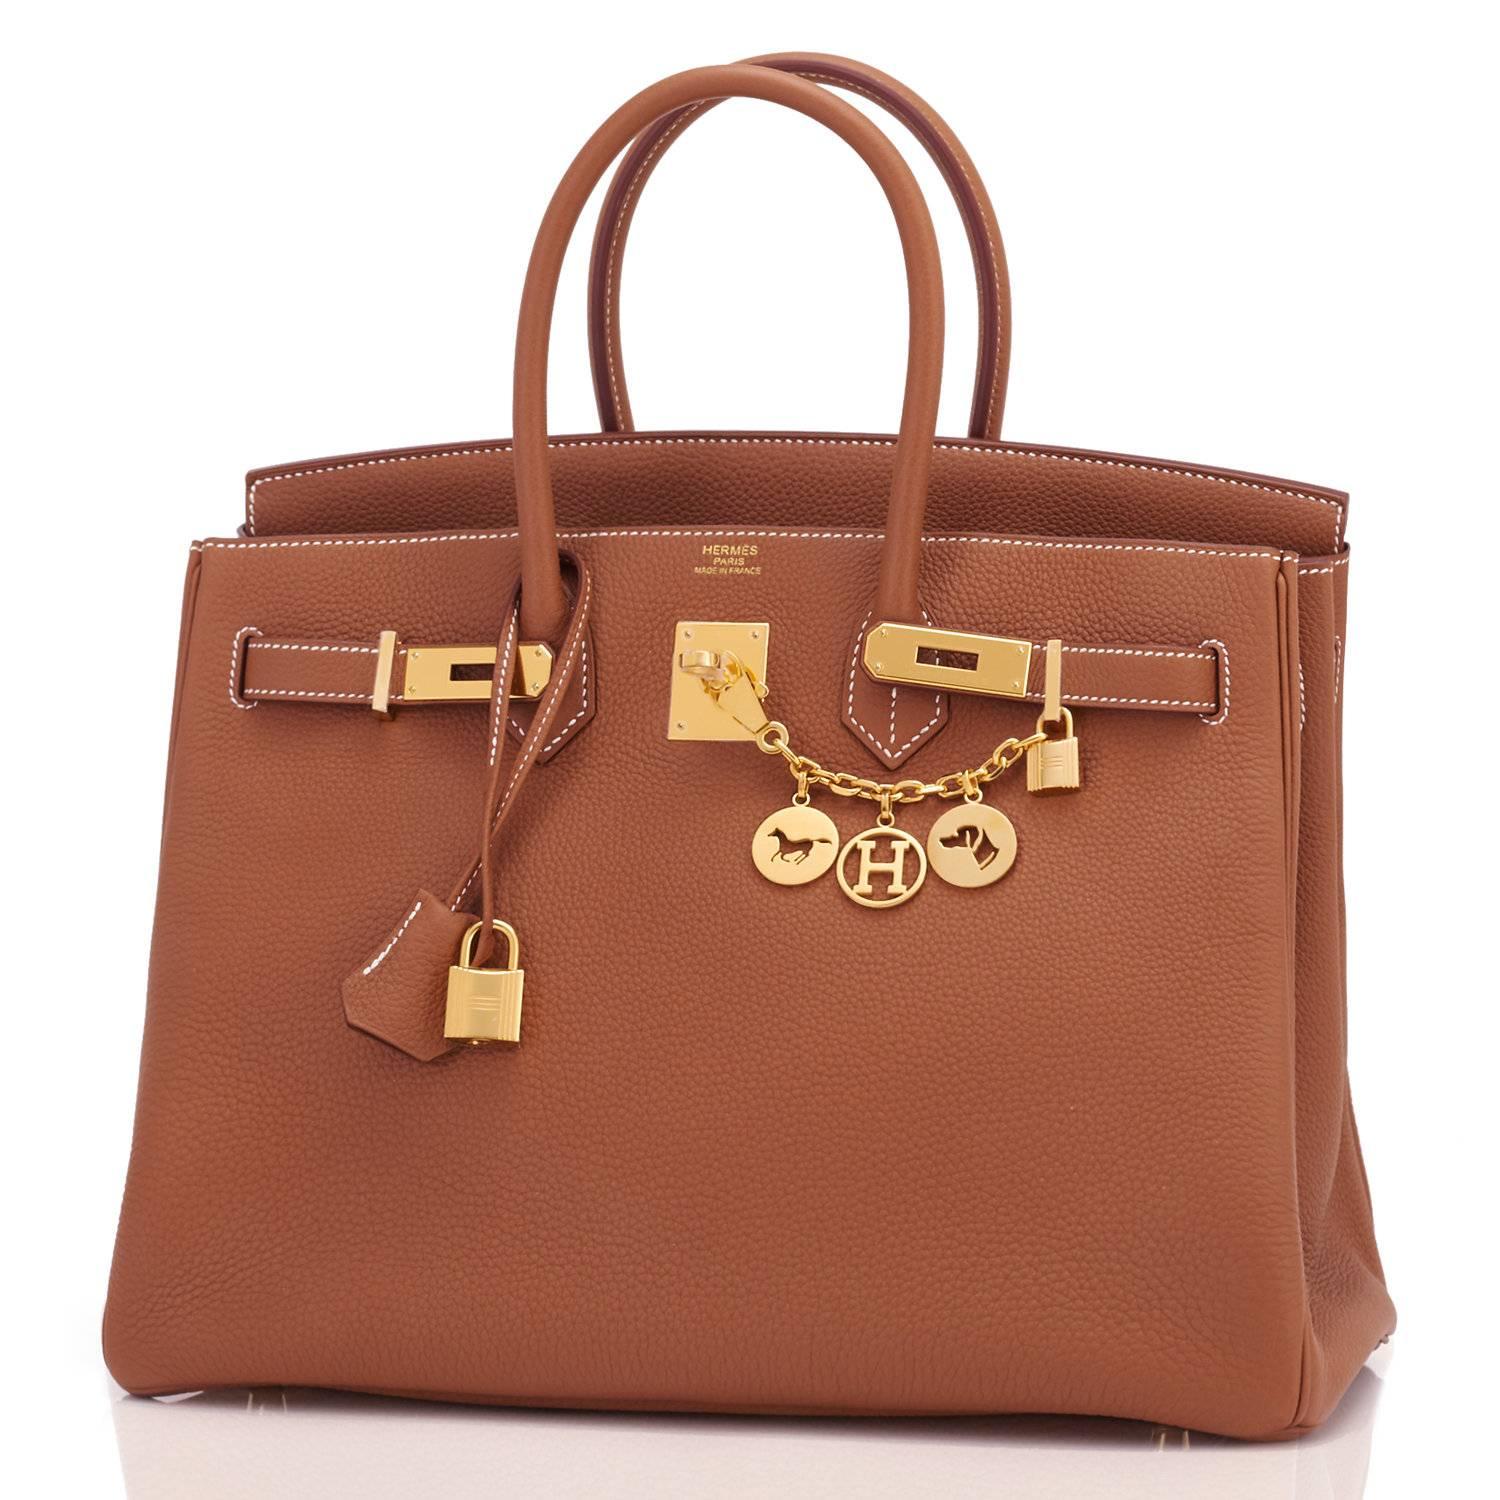 Hermes Gold Togo Camel Tan 35cm Birkin Gold Hardware Iconic 
Brand New in Box.  Store Fresh. Pristine Condition (with plastic on hardware). 
Perfect gift! Comes with lock, keys, clochette, sleeper, raincoat, and Hermes box and ribbon.
Gold is a